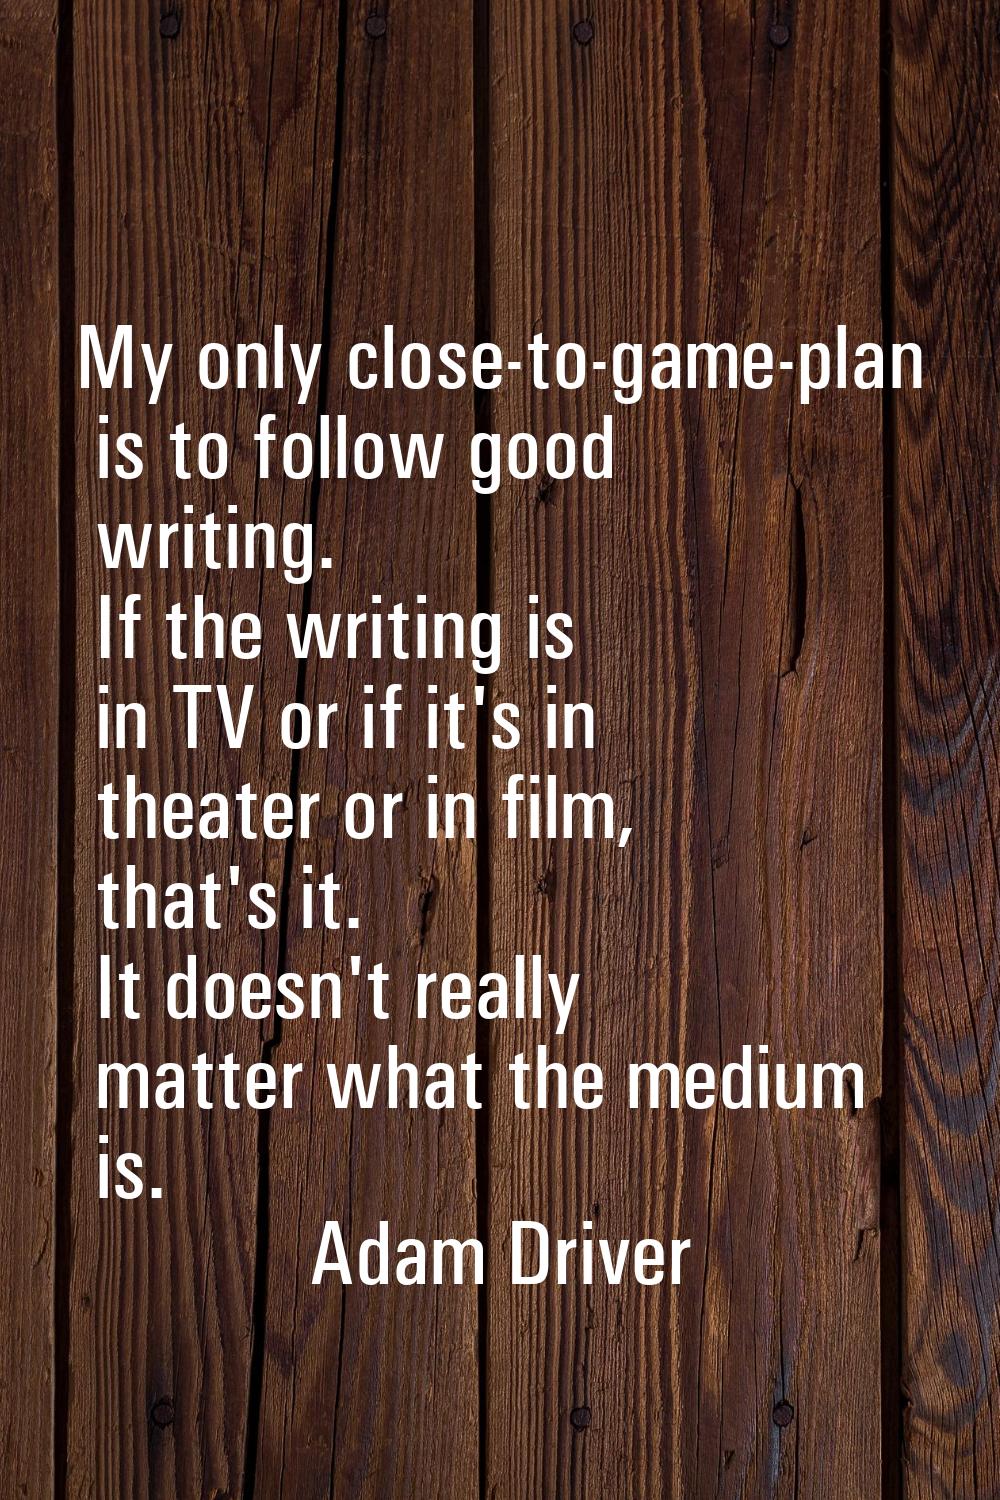 My only close-to-game-plan is to follow good writing. If the writing is in TV or if it's in theater